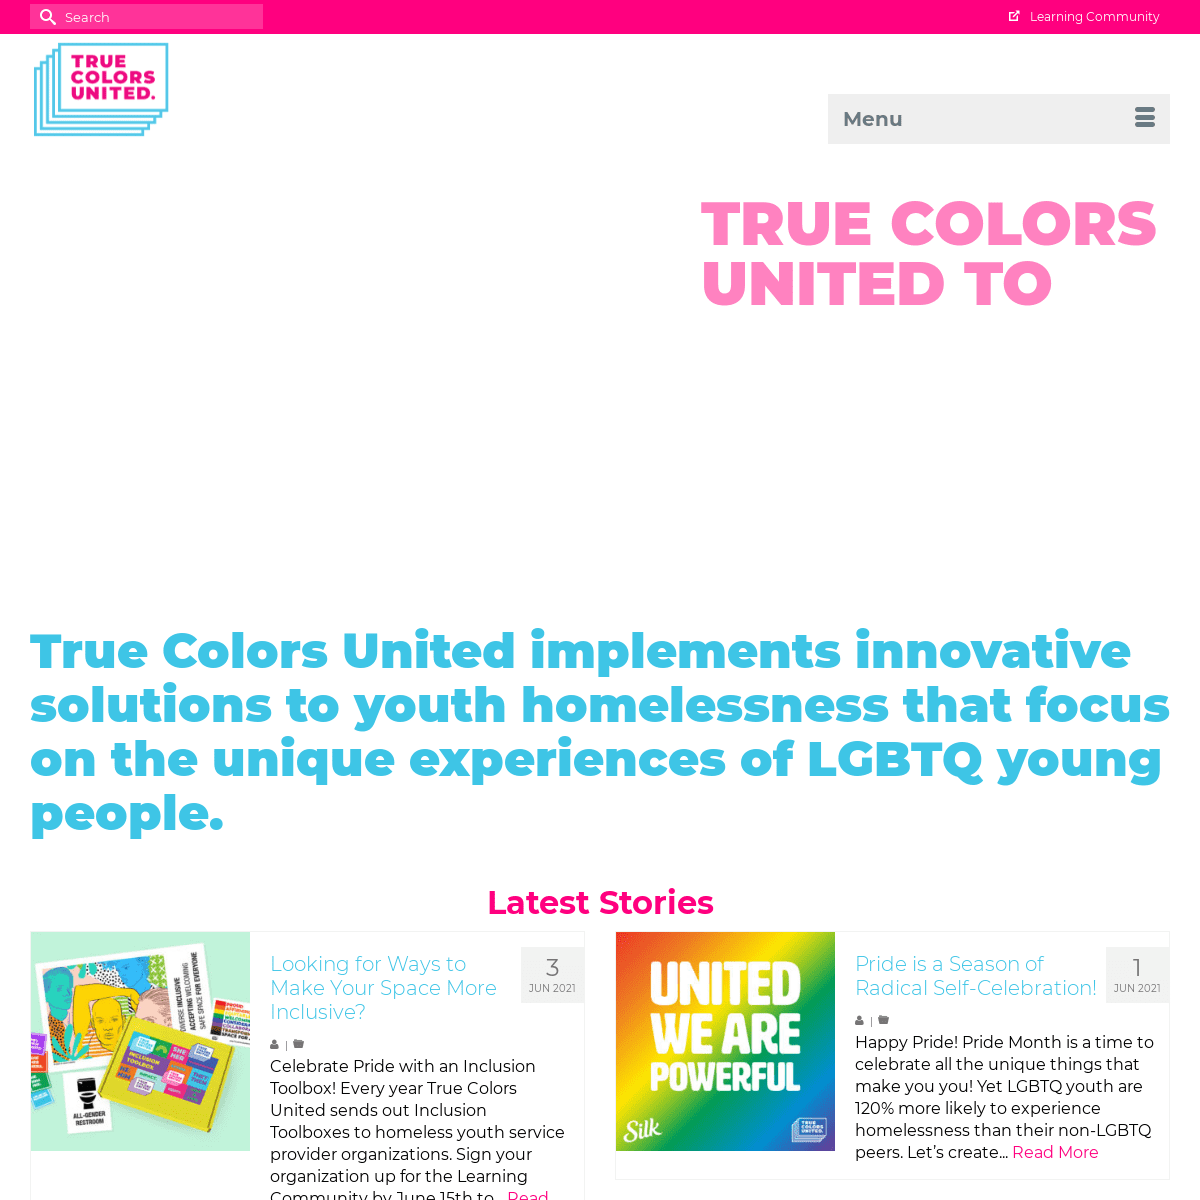 A complete backup of https://truecolorsunited.org